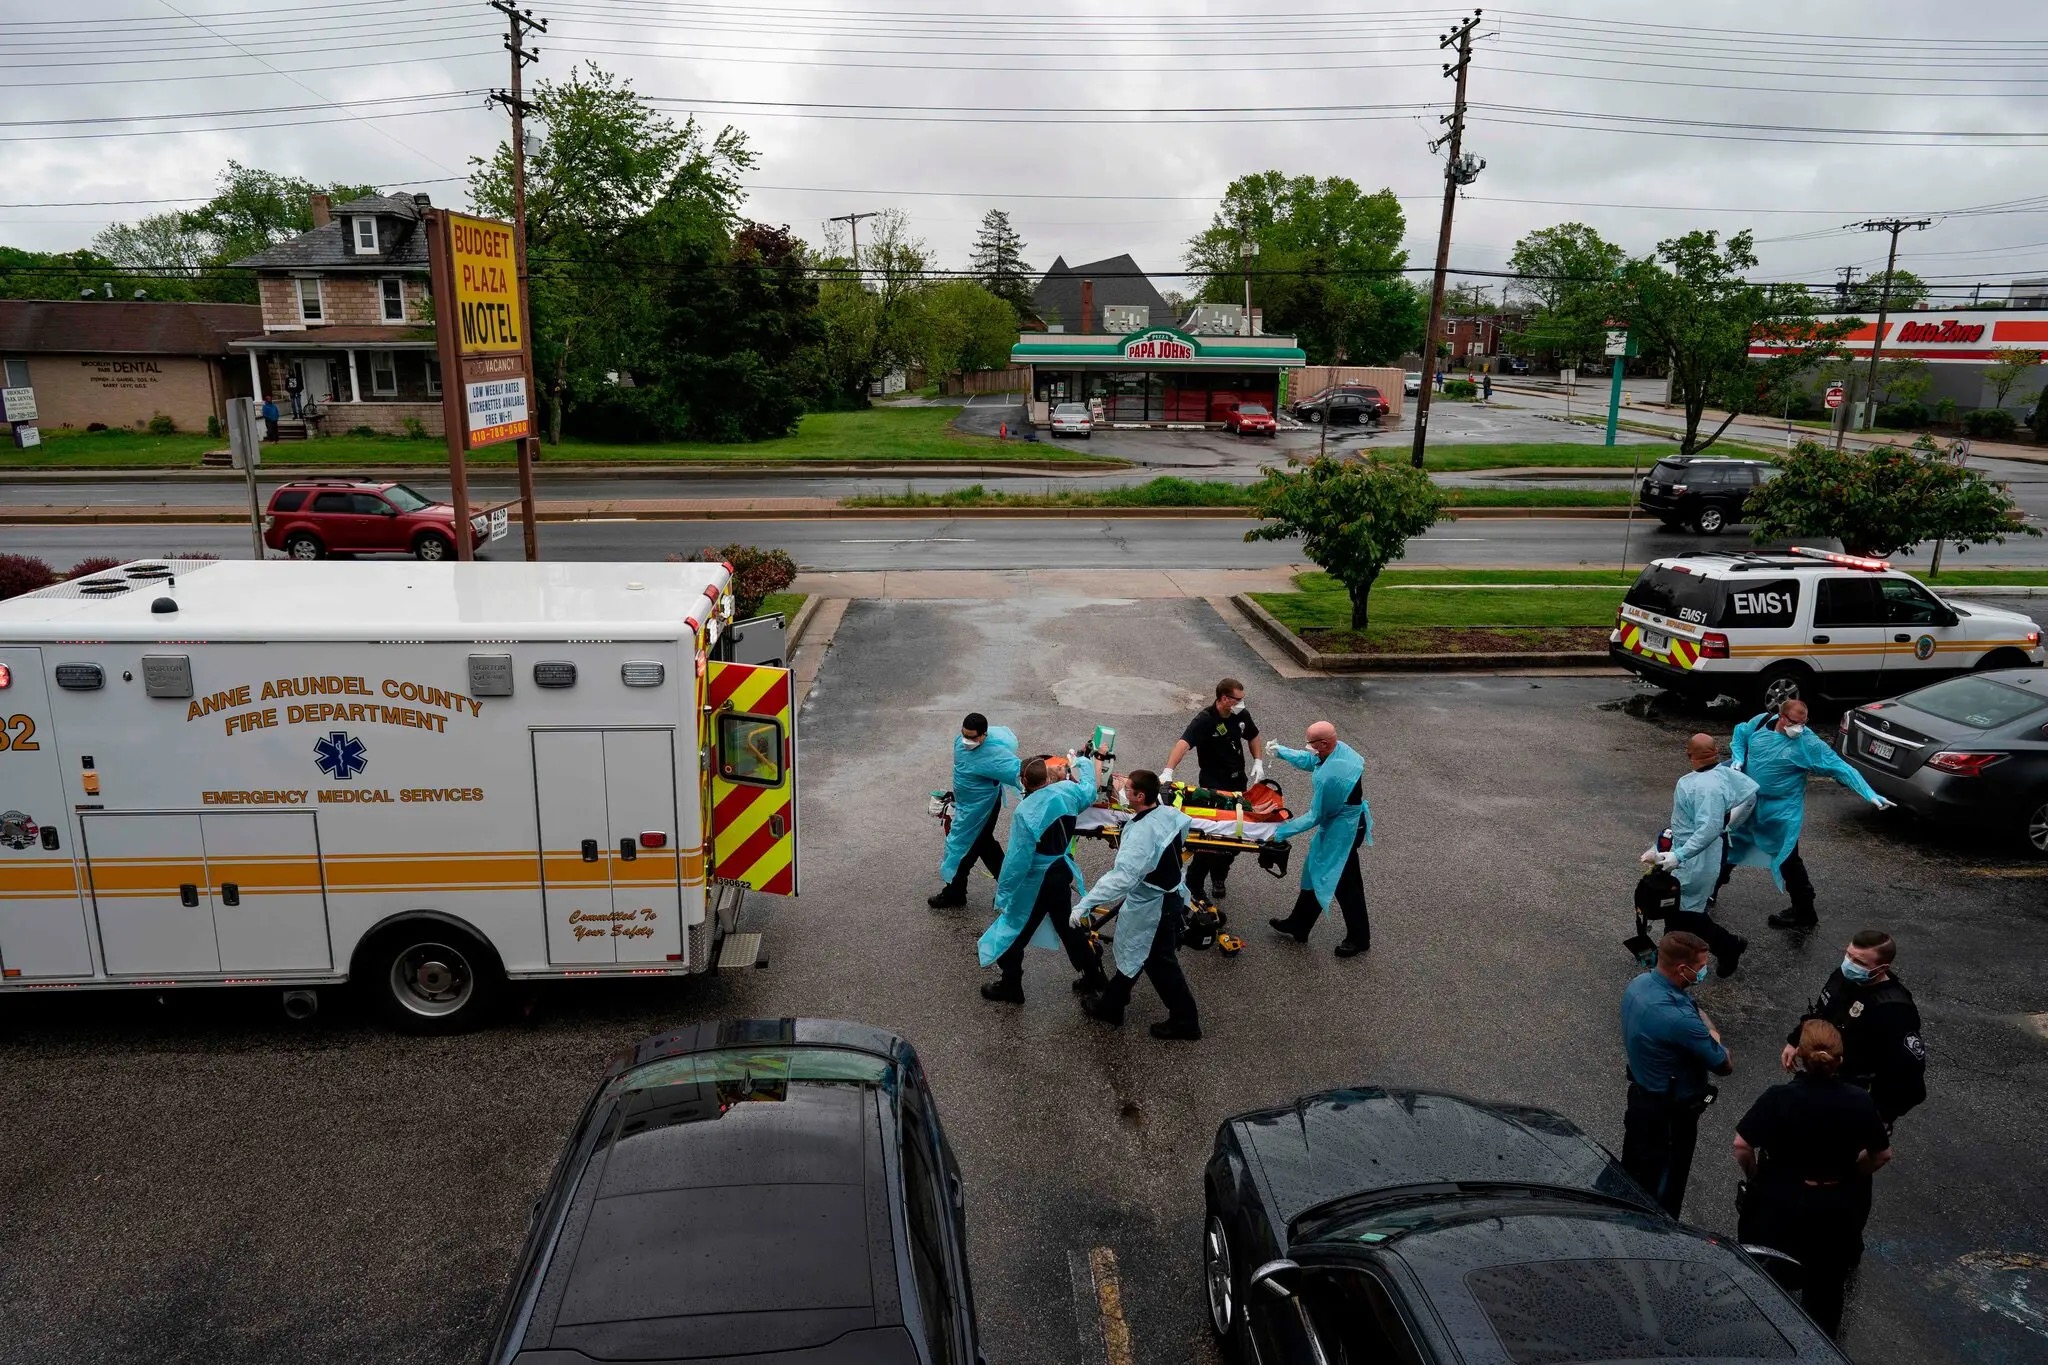 Firefighters and paramedics with Anne Arundel County Fire Department transport a patient after responding to a call for a cardiac arrest as a result of a drug overdose in Brooklyn, New York, the U.S., May 6, 2020. Alex Edelman/AFP via Getty Images